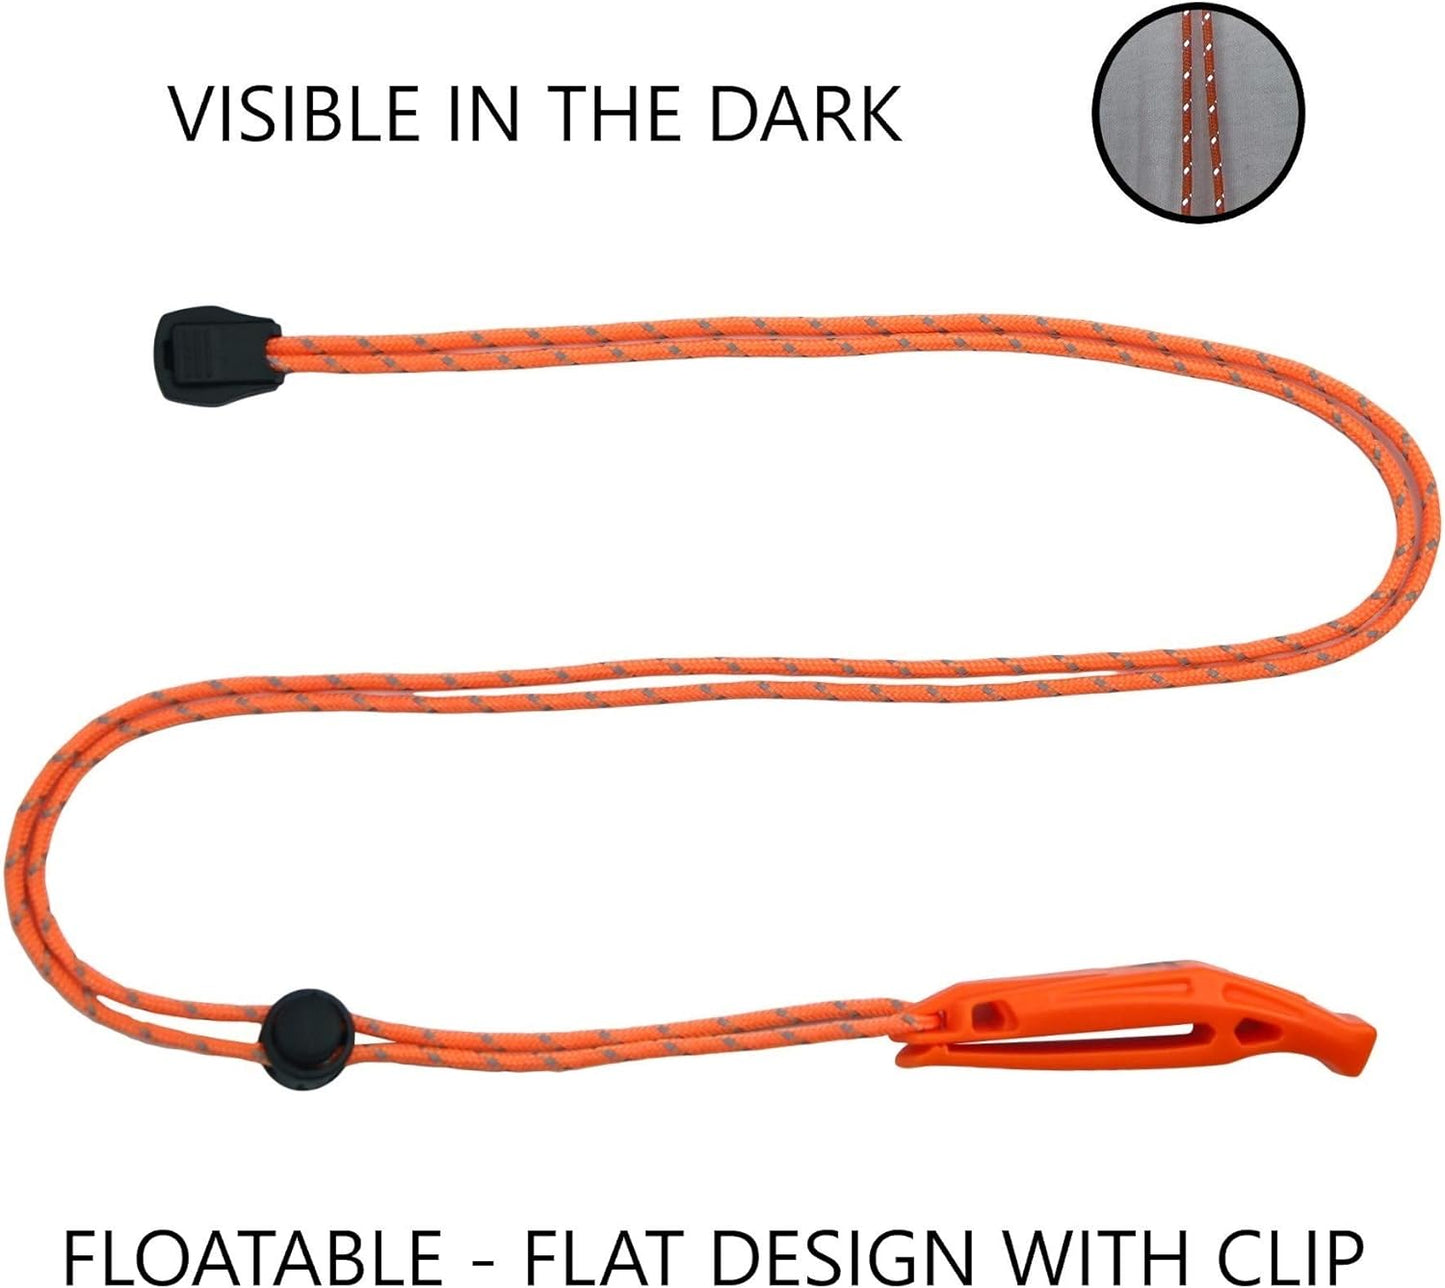 Emergency Whistles with Lanyard Safety Whistle Survival Shrill Loud Blast for Kayak Life Vest Jacket Boating Fishing Boat Camping Hiking Hunting Rescue Signaling Kids Lifeguard Plastic 2 Pack